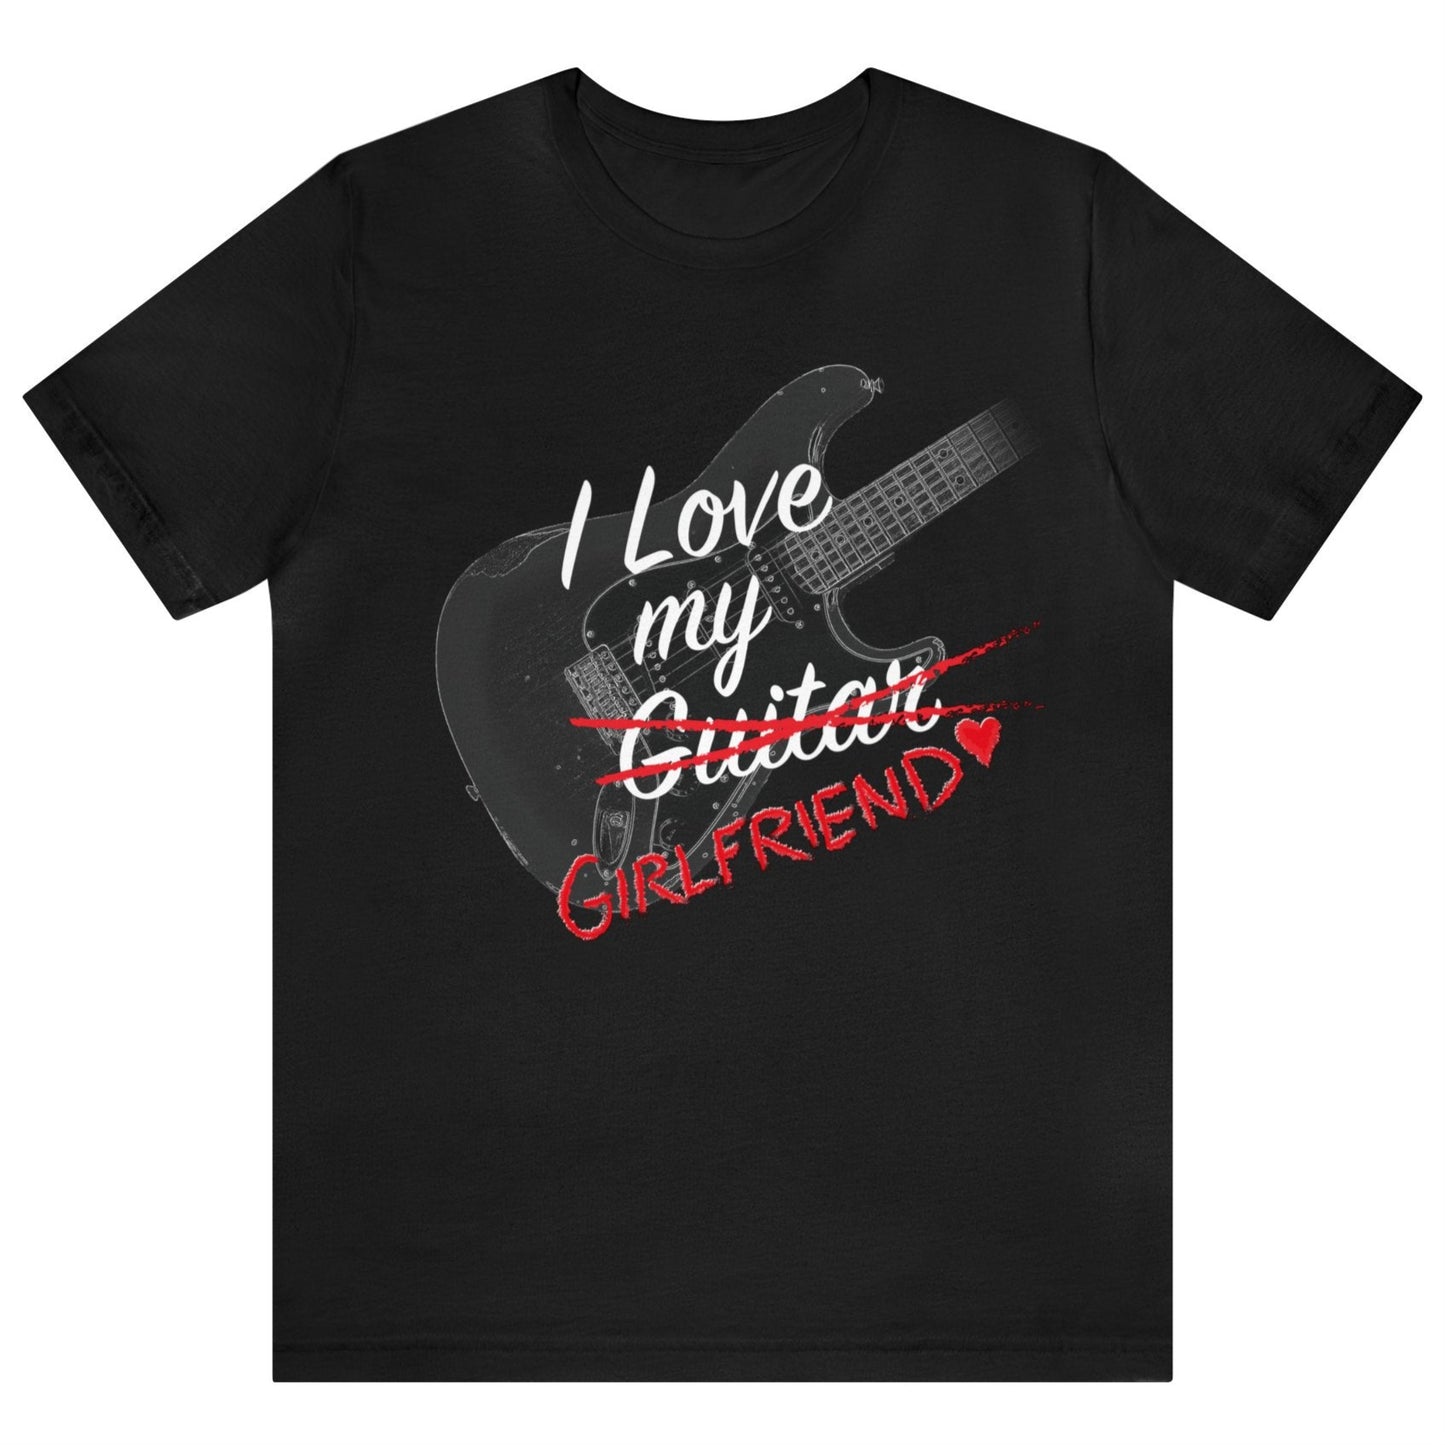 I LOVE My GIRLFRIEND (Guitar), T-Shirt for Boyfriend, Valentine's Day Gift, Stratocaster on Unisex Bella+Canvas Tee, Gift for Guitar Player